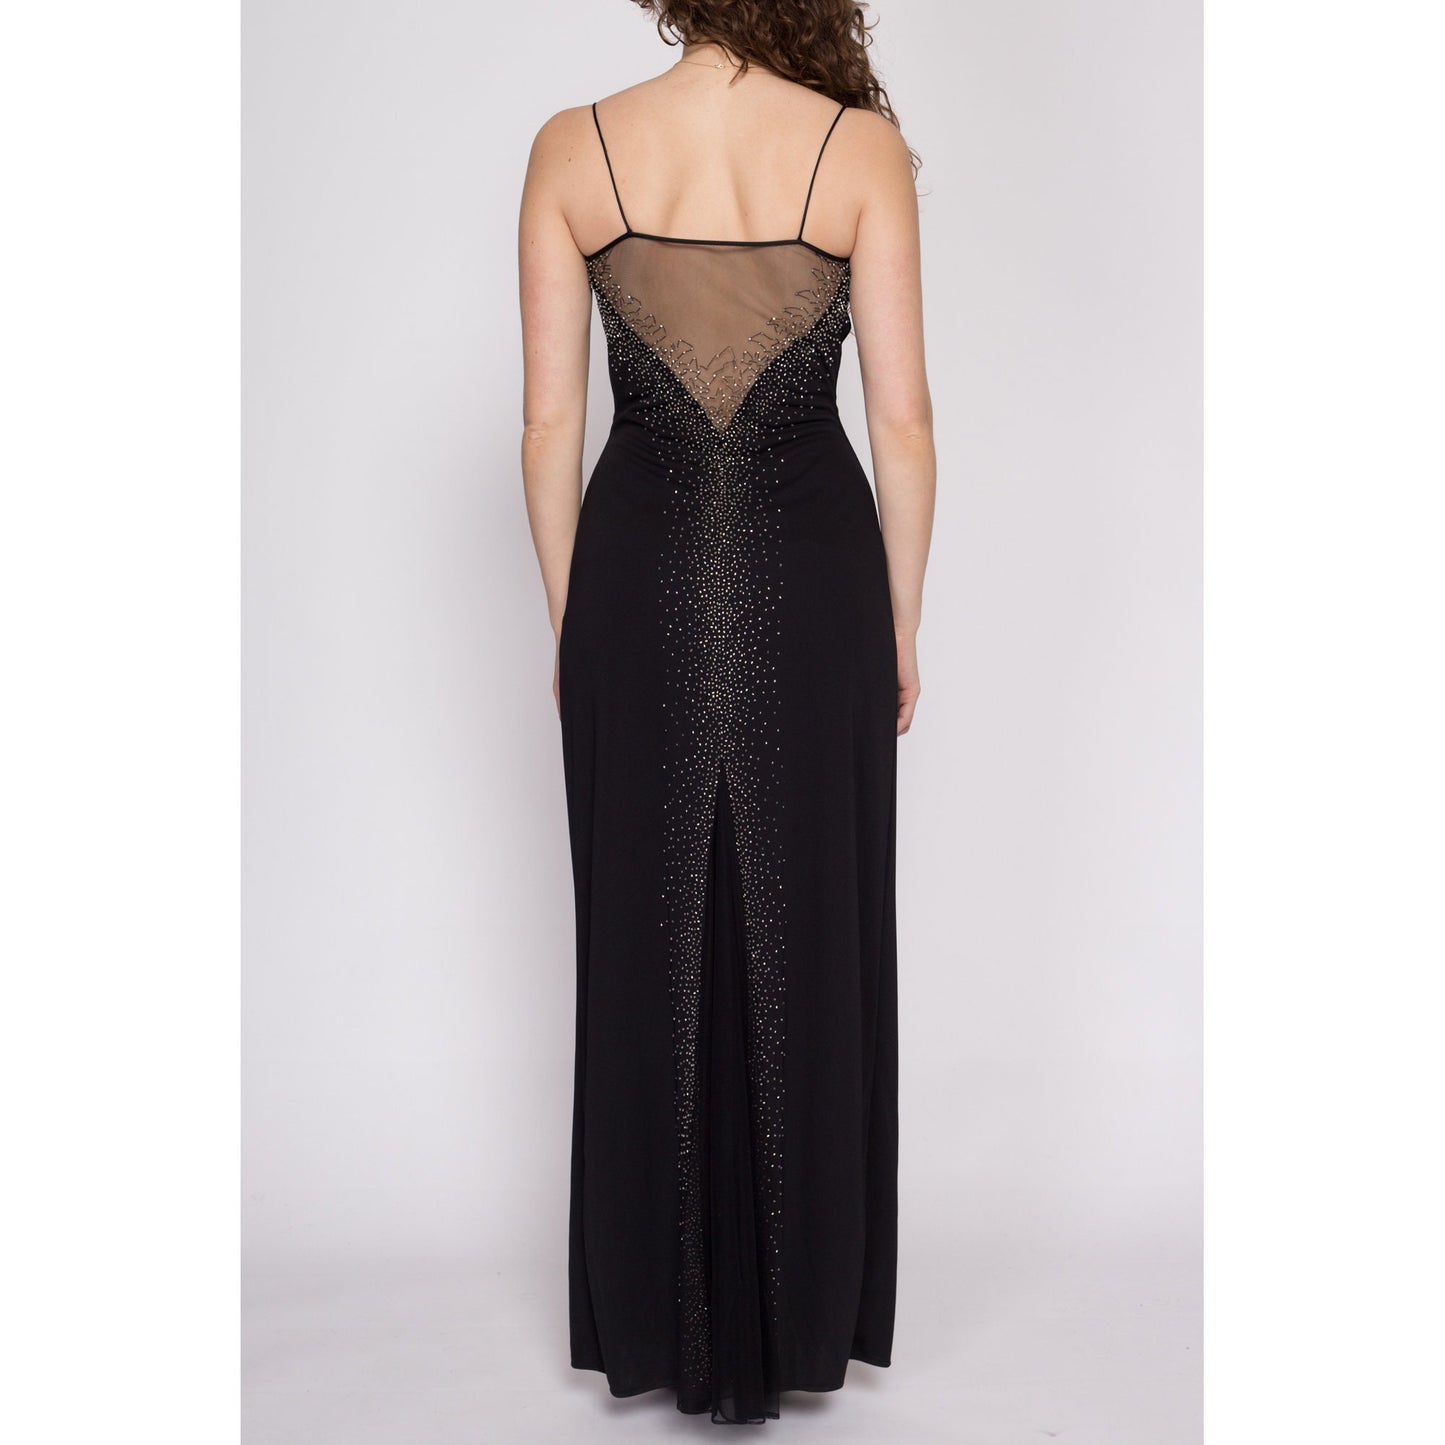 S-M| 90s Dave & Johnny Black Beaded Sheer Low Back Maxi Dress - Small to Medium | Vintage Spaghetti Strap Sleeveless Slinky Sexy Formal Gown